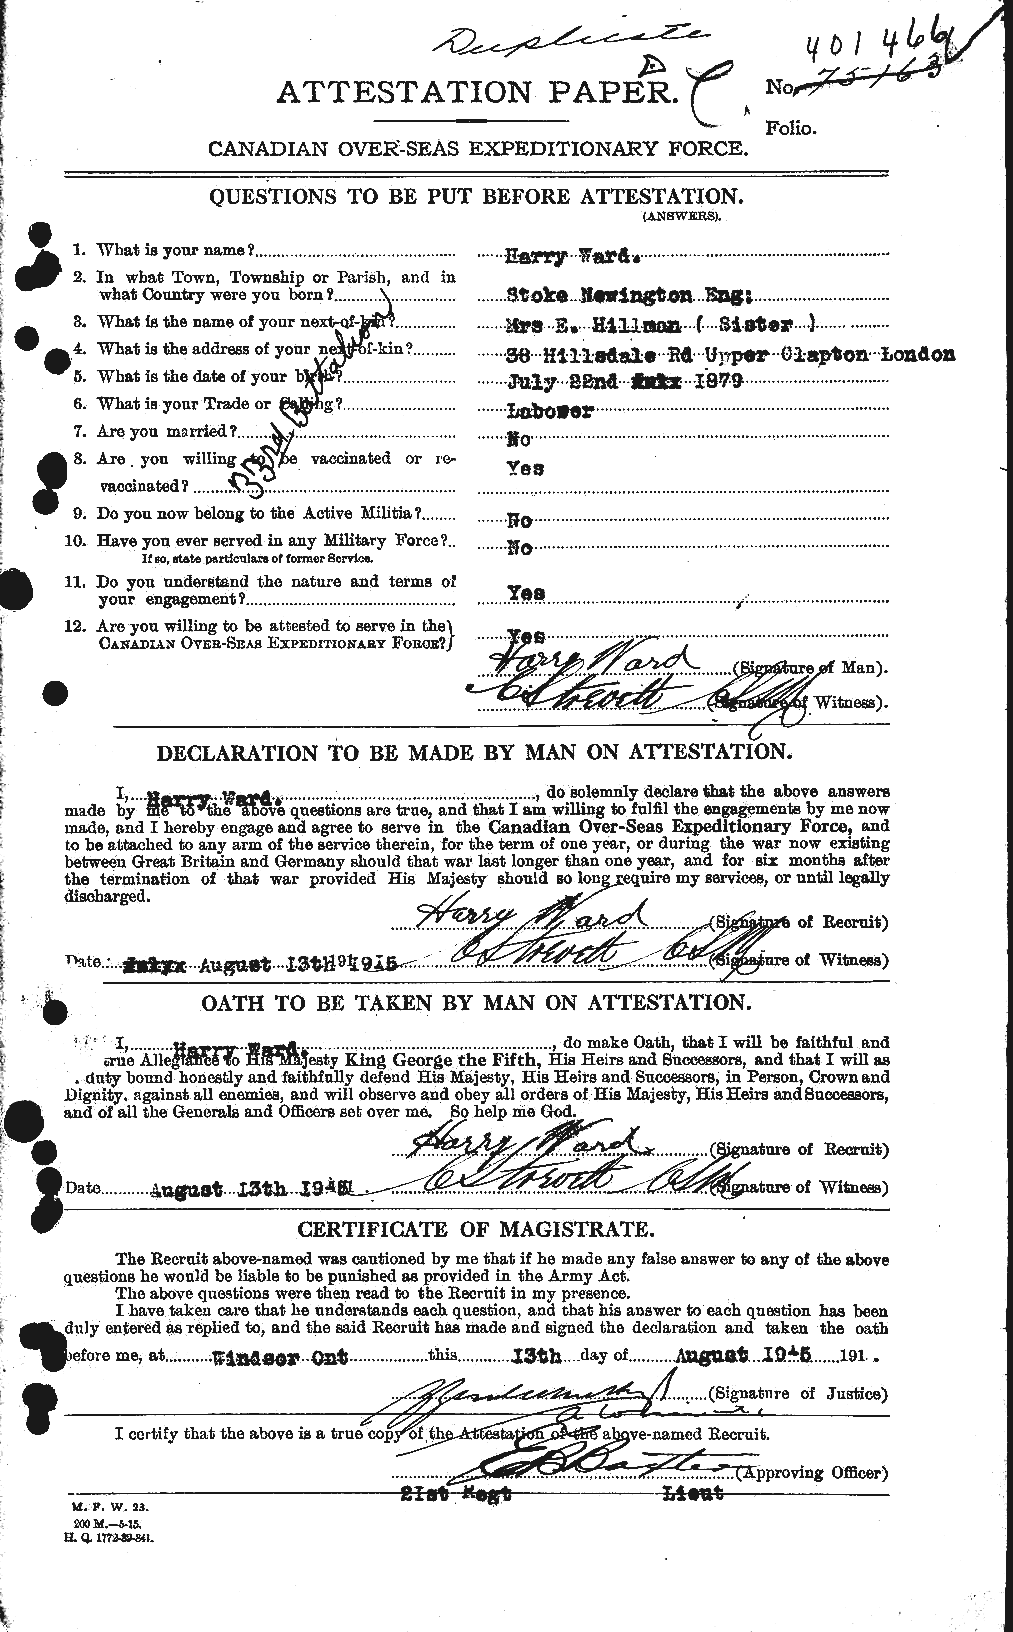 Personnel Records of the First World War - CEF 657810a